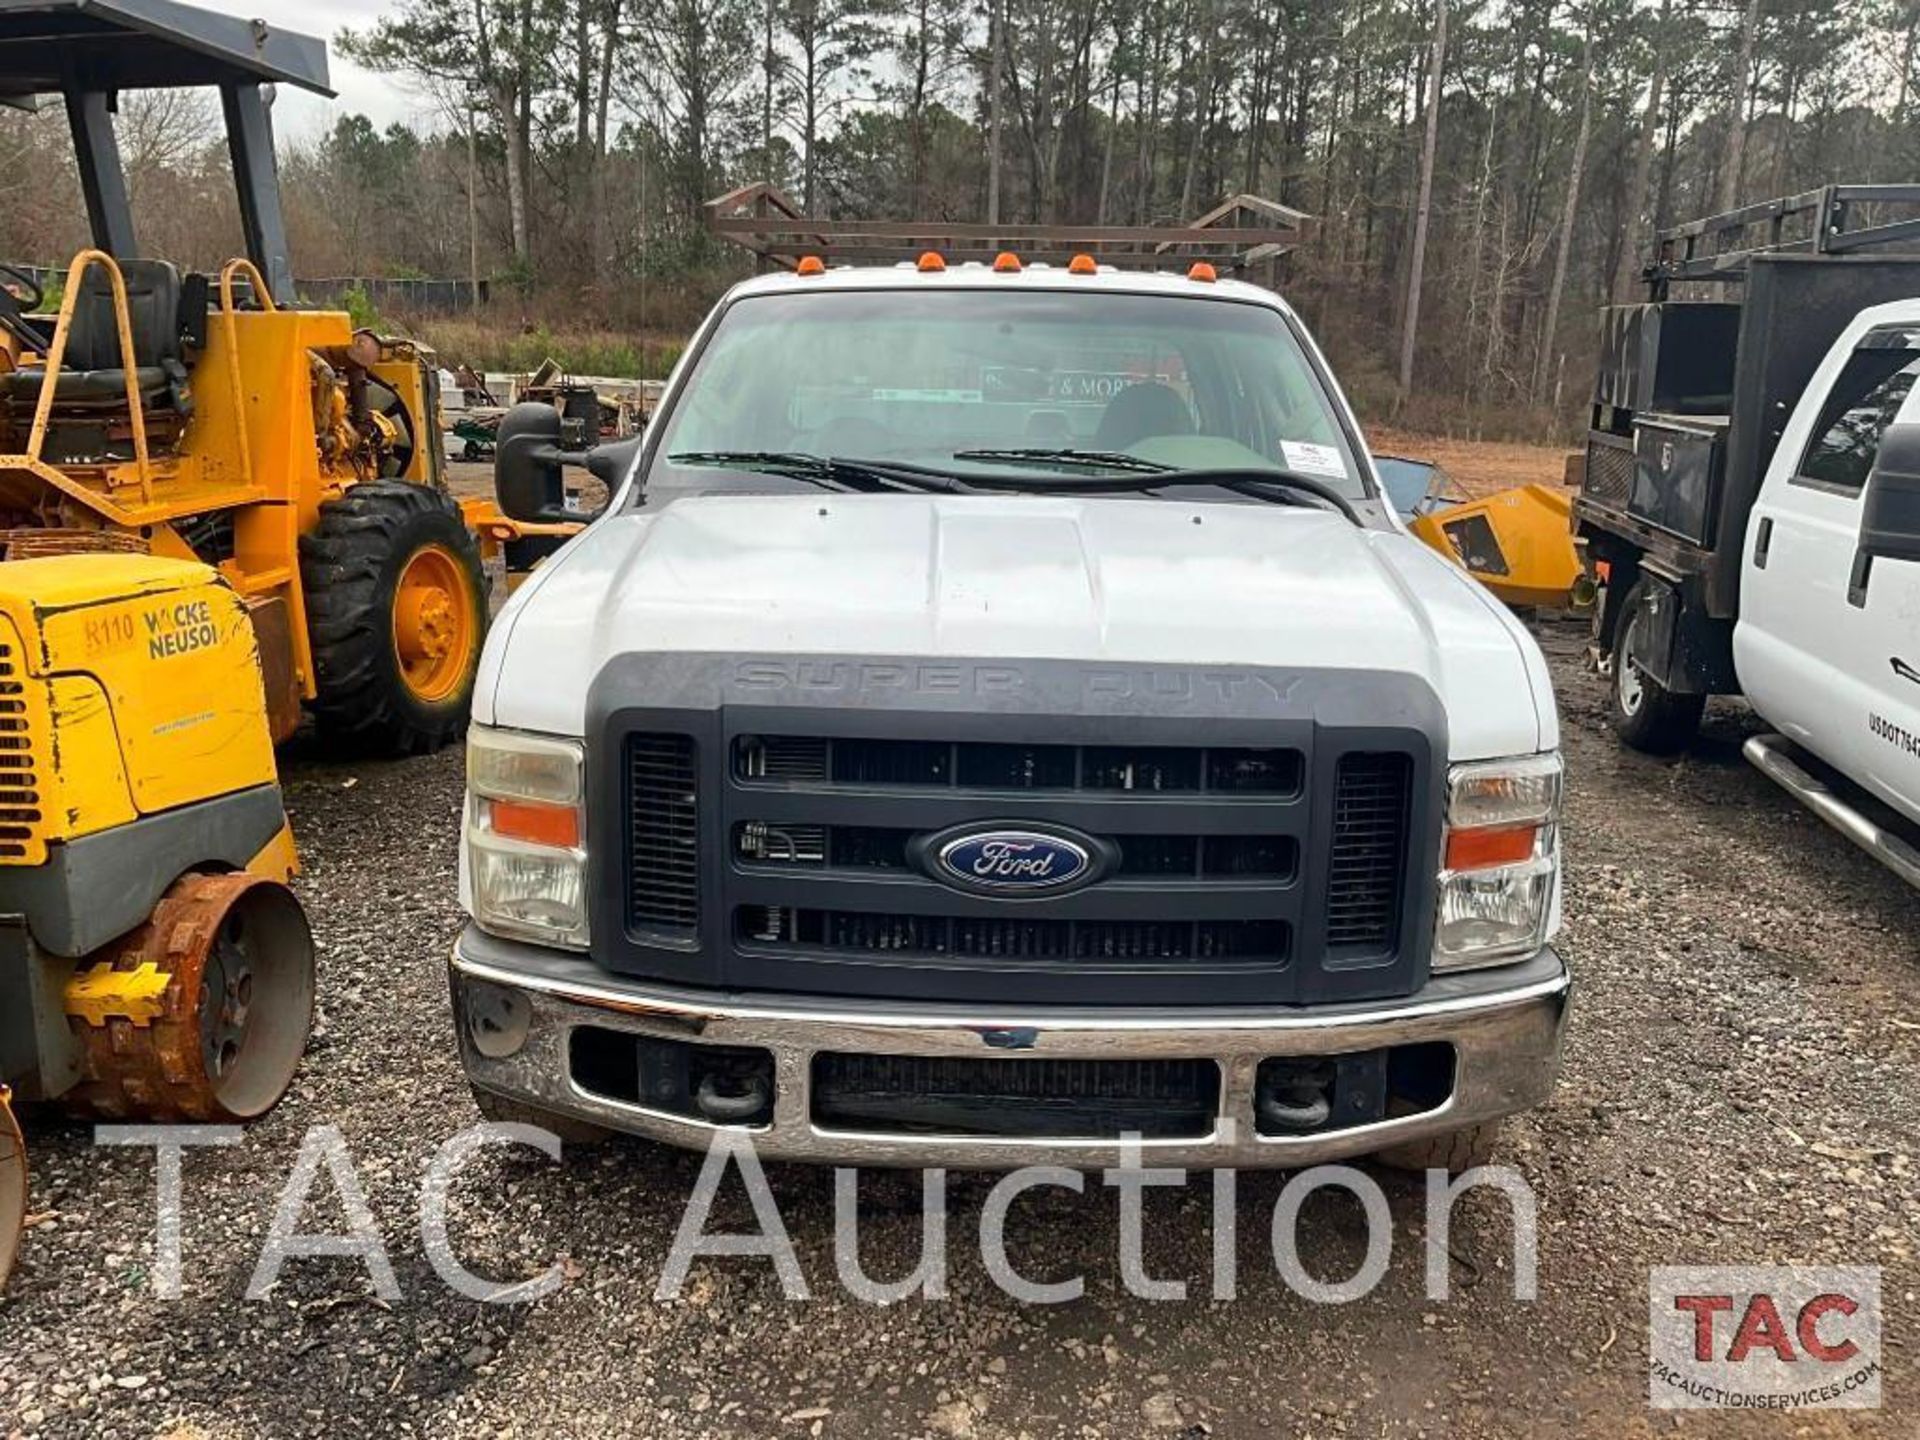 2008 Ford F-350 Super Duty Service Truck - Image 4 of 124